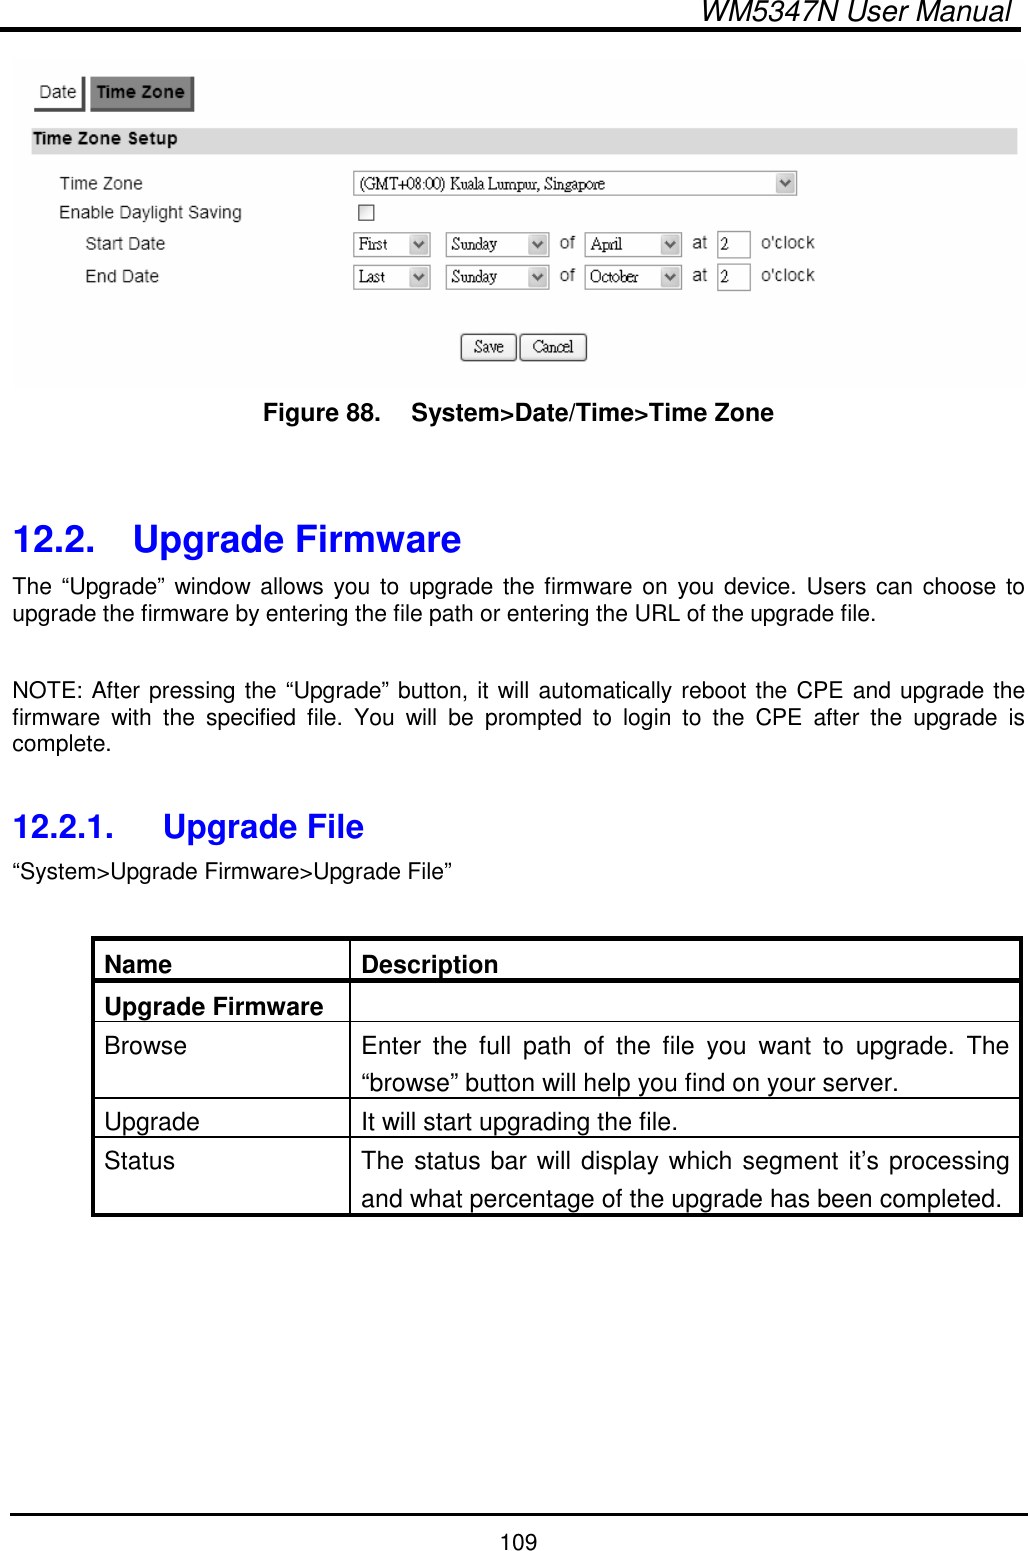  WM5347N User Manual  109  Figure 88.   System&gt;Date/Time&gt;Time Zone   12.2.  Upgrade Firmware The “Upgrade” window allows you to upgrade the firmware on you device. Users  can choose to upgrade the firmware by entering the file path or entering the URL of the upgrade file.  NOTE: After pressing the “Upgrade” button, it will automatically reboot the CPE and upgrade the firmware  with  the  specified  file.  You  will  be  prompted  to  login  to  the  CPE  after  the  upgrade  is complete.  12.2.1.  Upgrade File “System&gt;Upgrade Firmware&gt;Upgrade File”  Name  Description Upgrade Firmware   Browse  Enter  the  full  path  of  the  file  you  want  to  upgrade.  The “browse” button will help you find on your server. Upgrade  It will start upgrading the file. Status  The status bar will display which segment it’s processing and what percentage of the upgrade has been completed.  